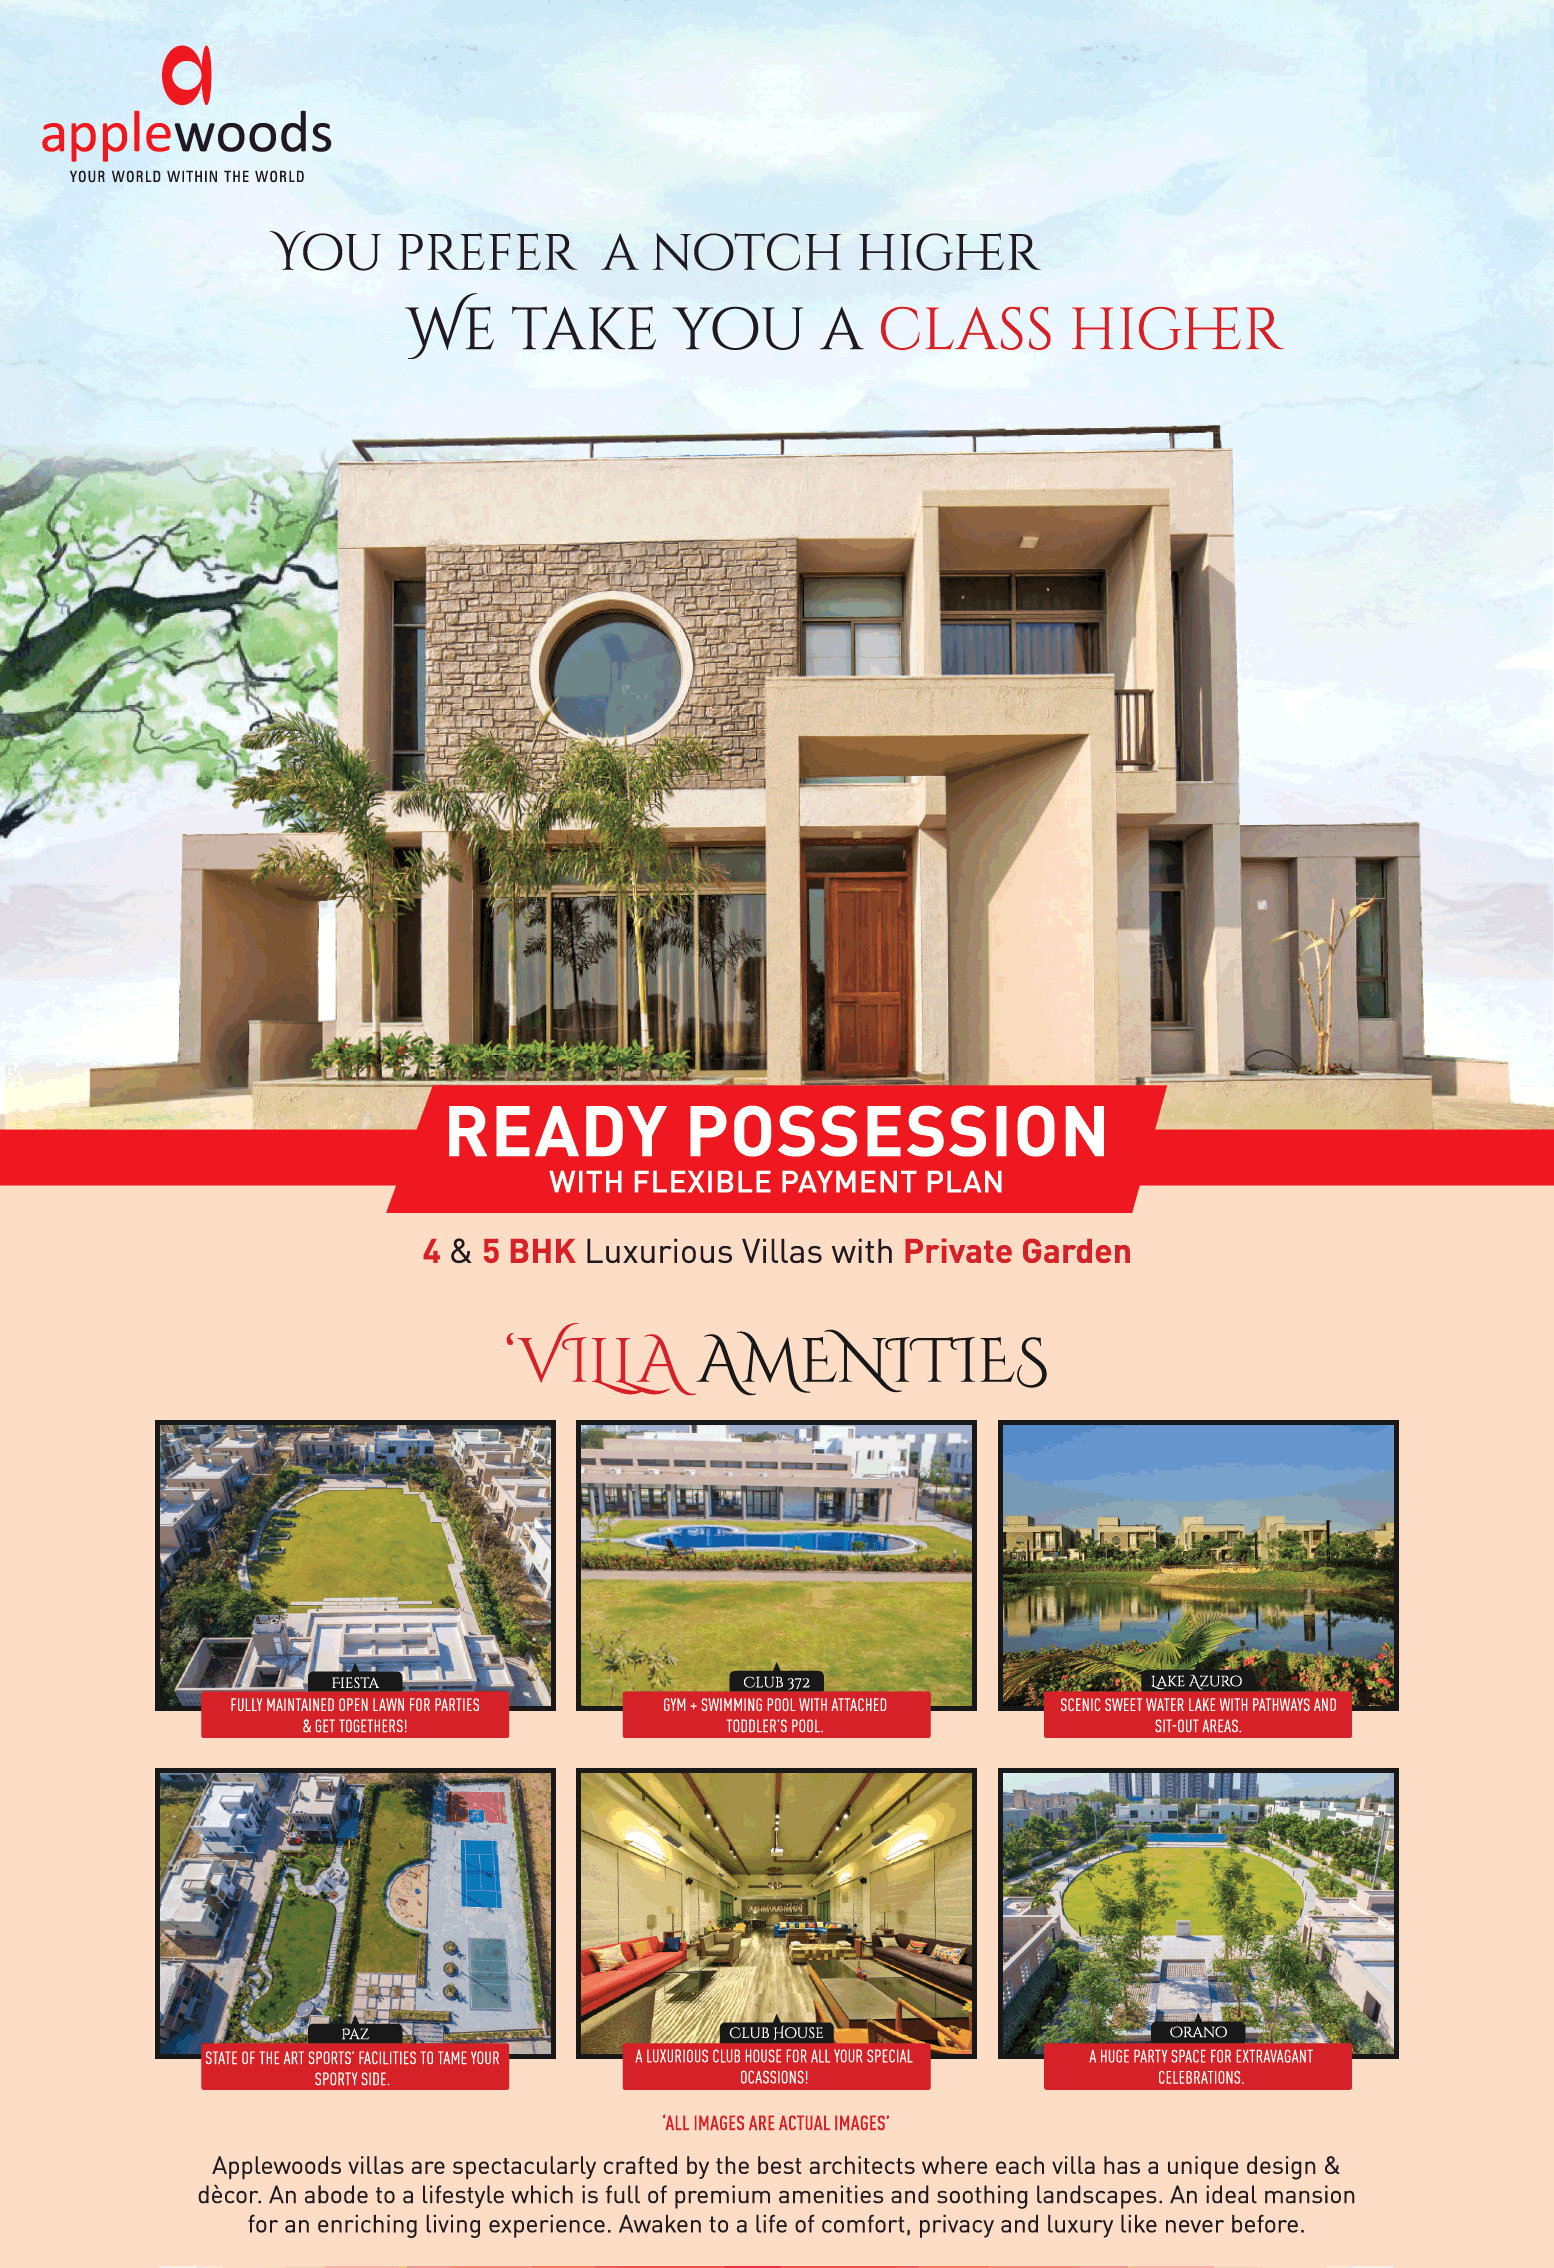 Ready possession with a flexible payment plan at Applewood Sorrel in Ahmedabad Update